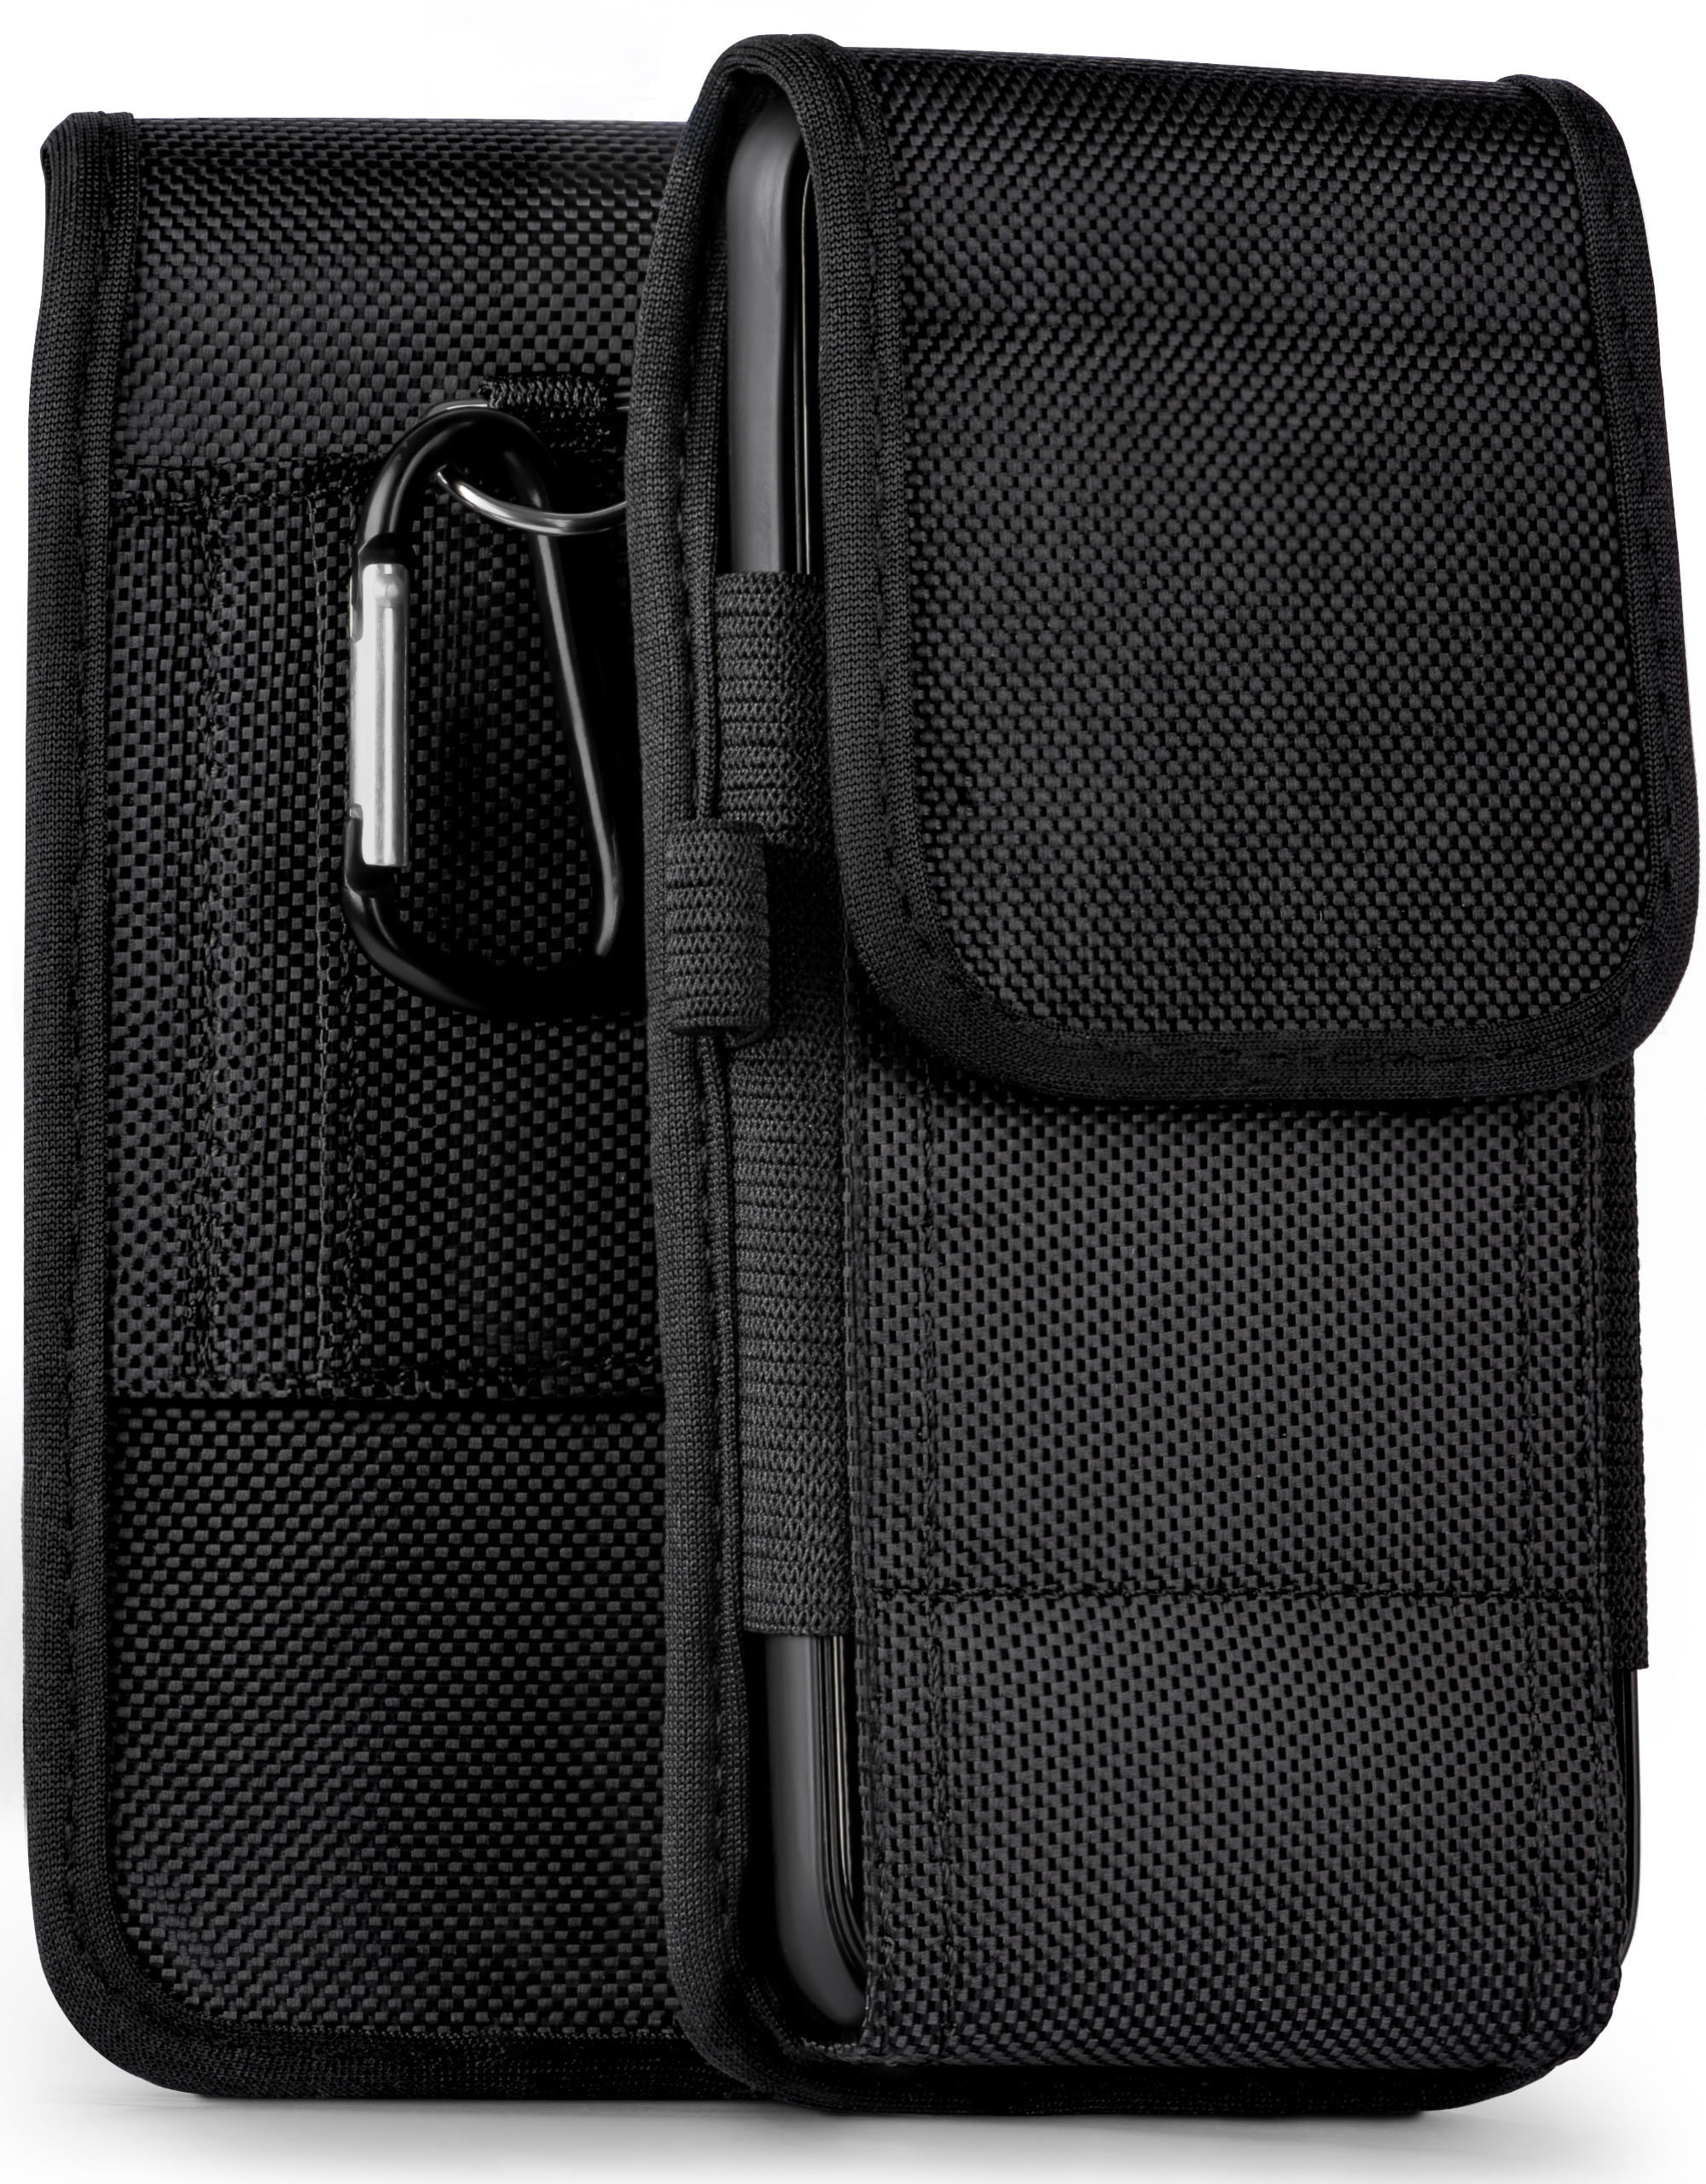 Case, Trail OnePlus, Holster, MOEX Agility 7,